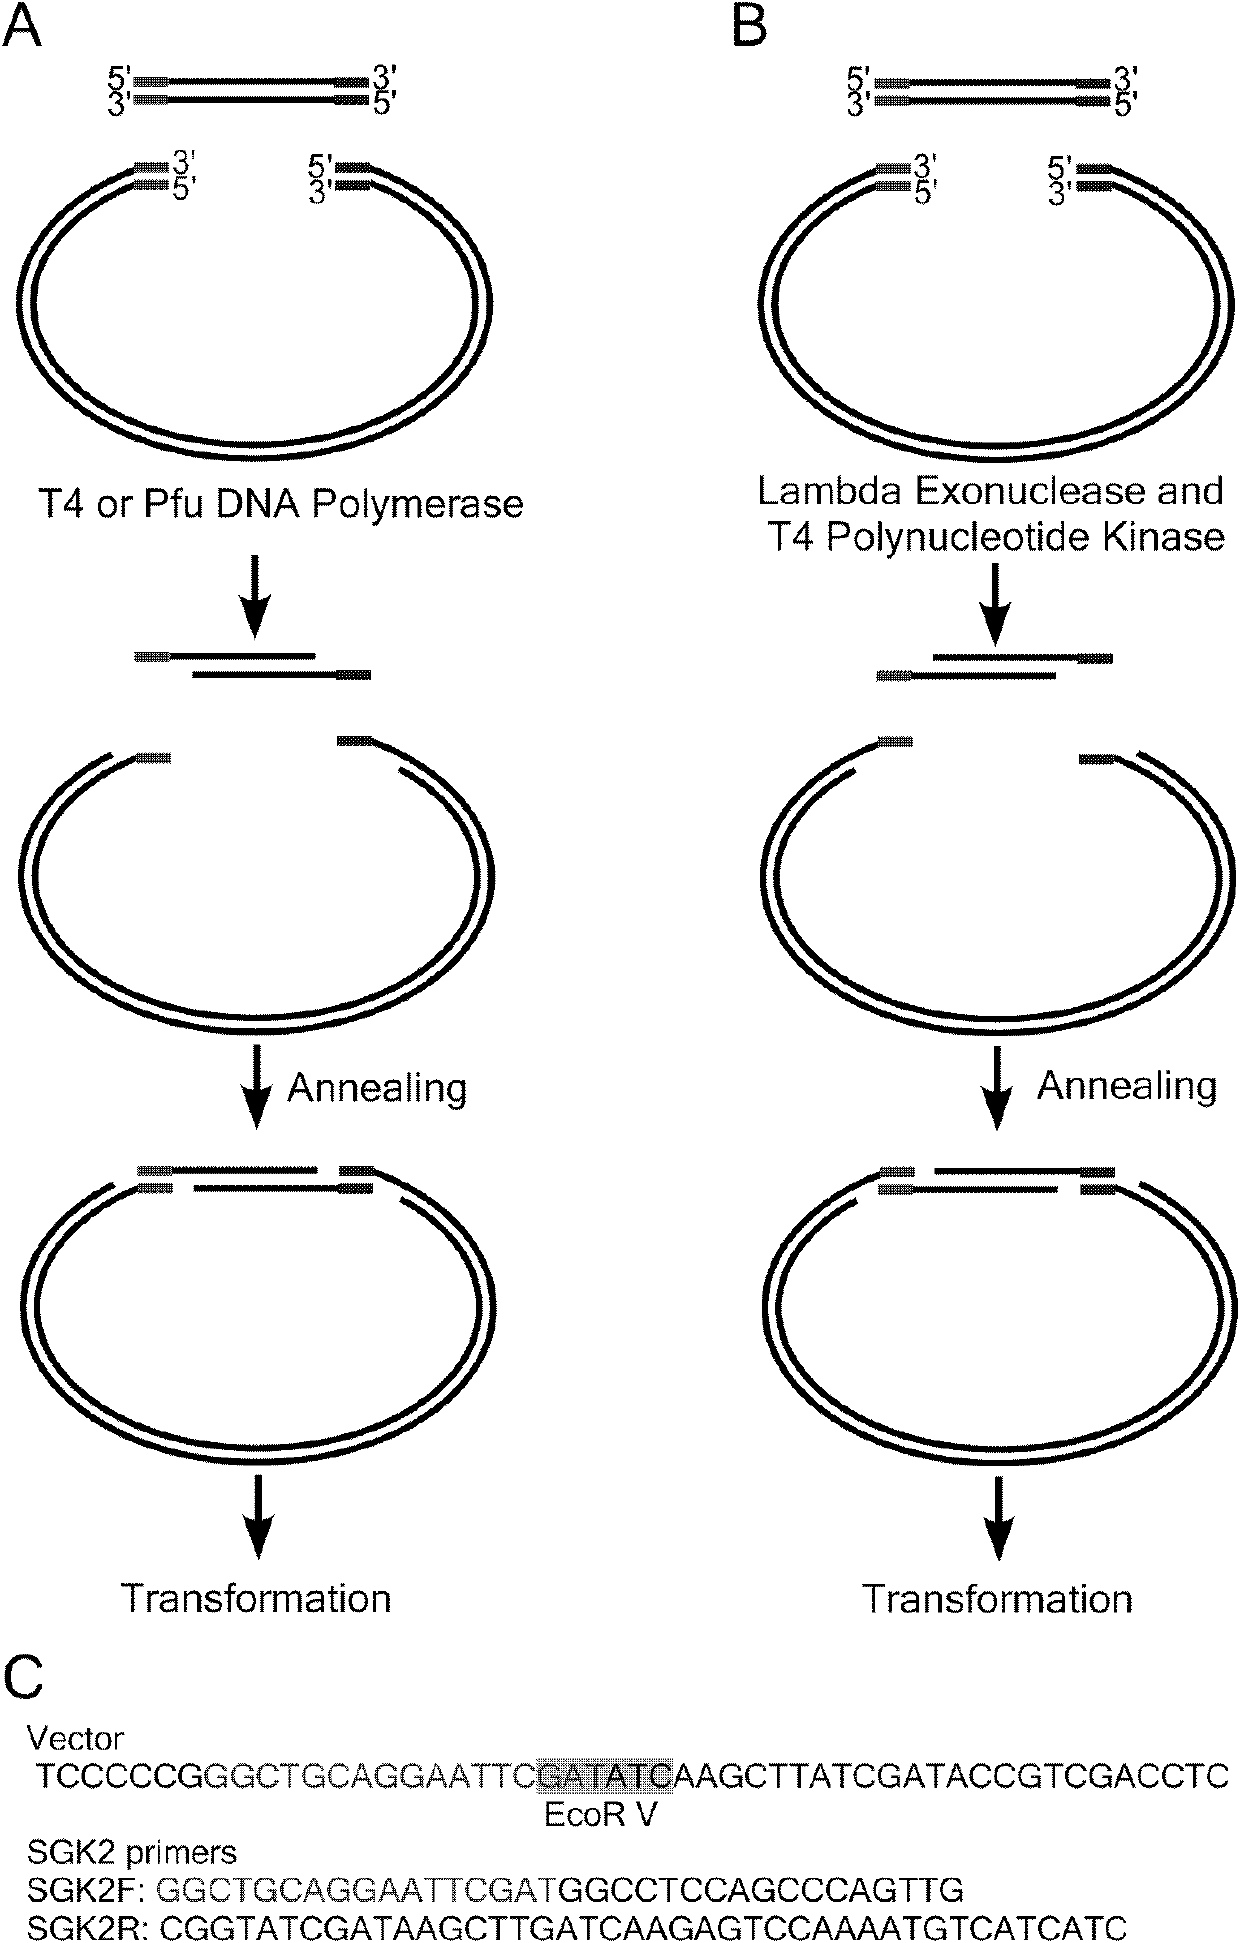 Traceless cloning and reorganizing method by means of activity of exonuclease